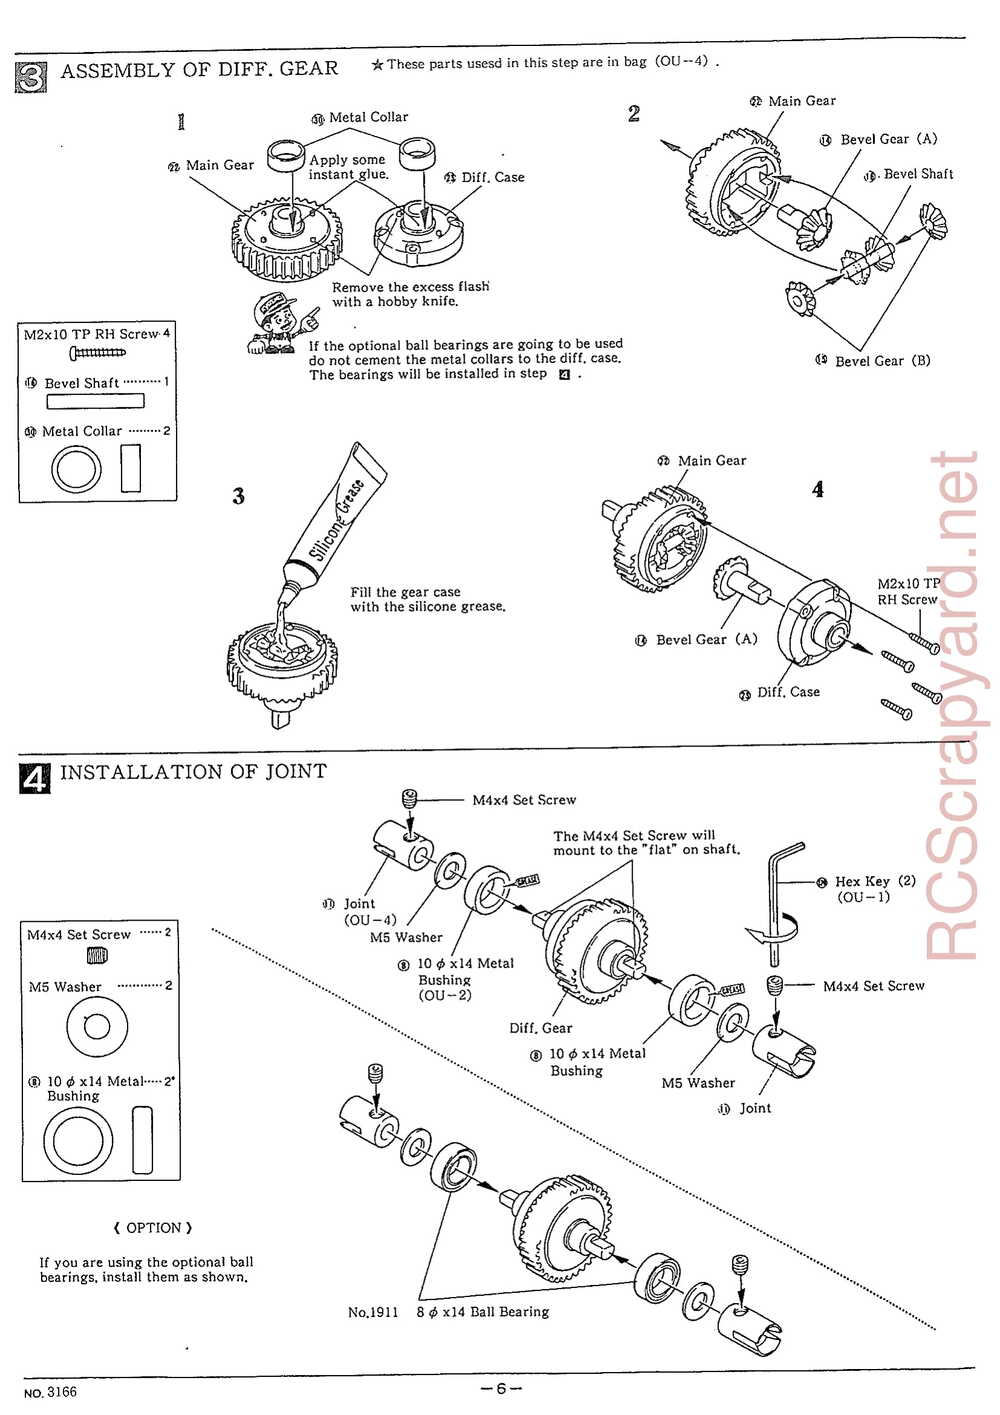 Kyosho - 3166 - Outlaw-Ultima Truck - Manual - Page 06